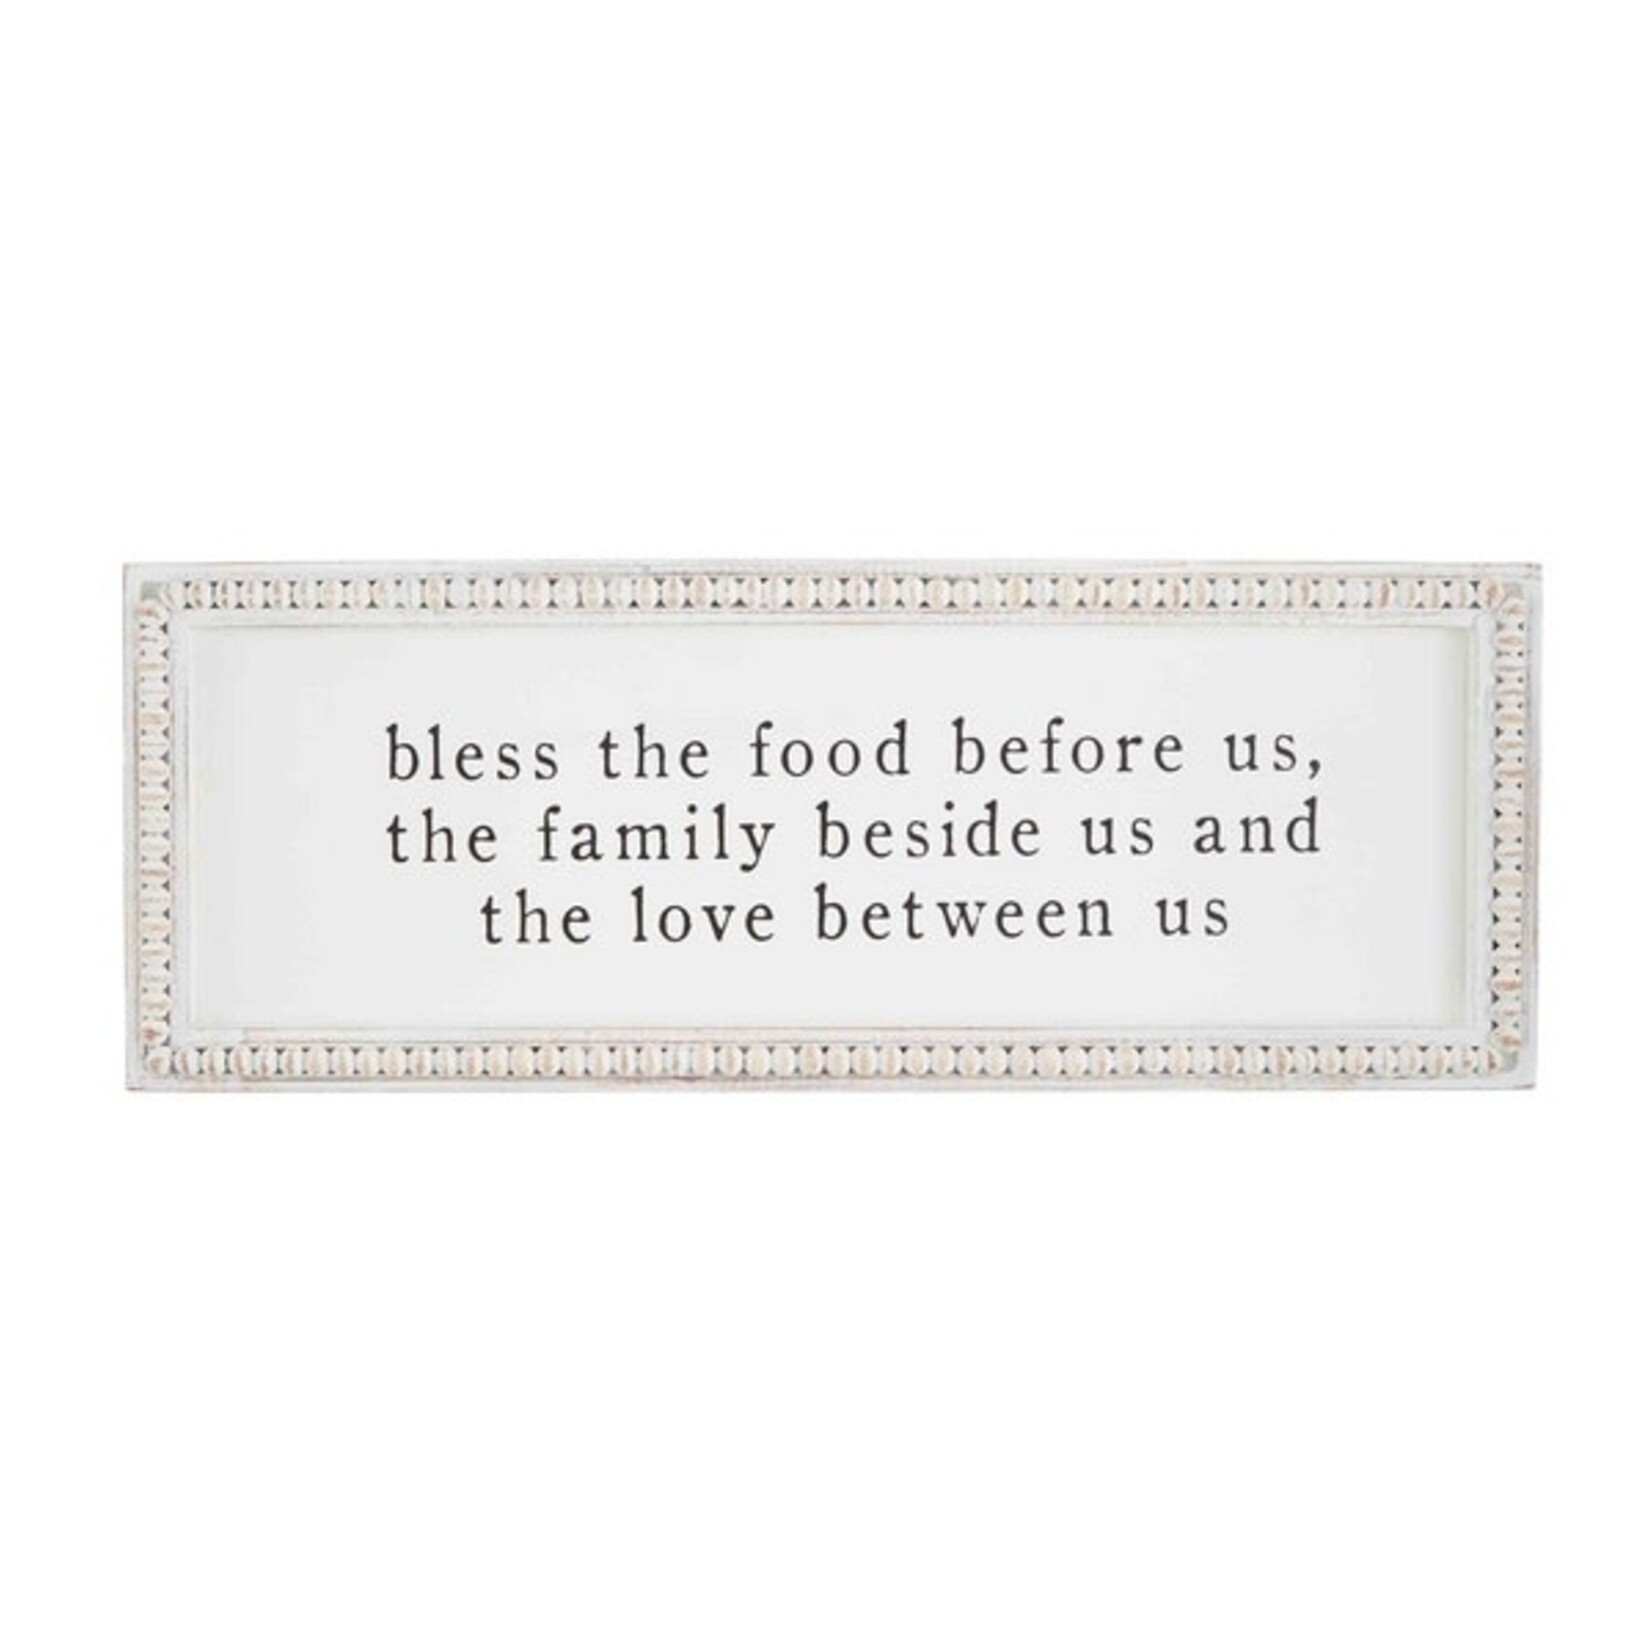 Mud Pie Bless The Food Bead Plaque